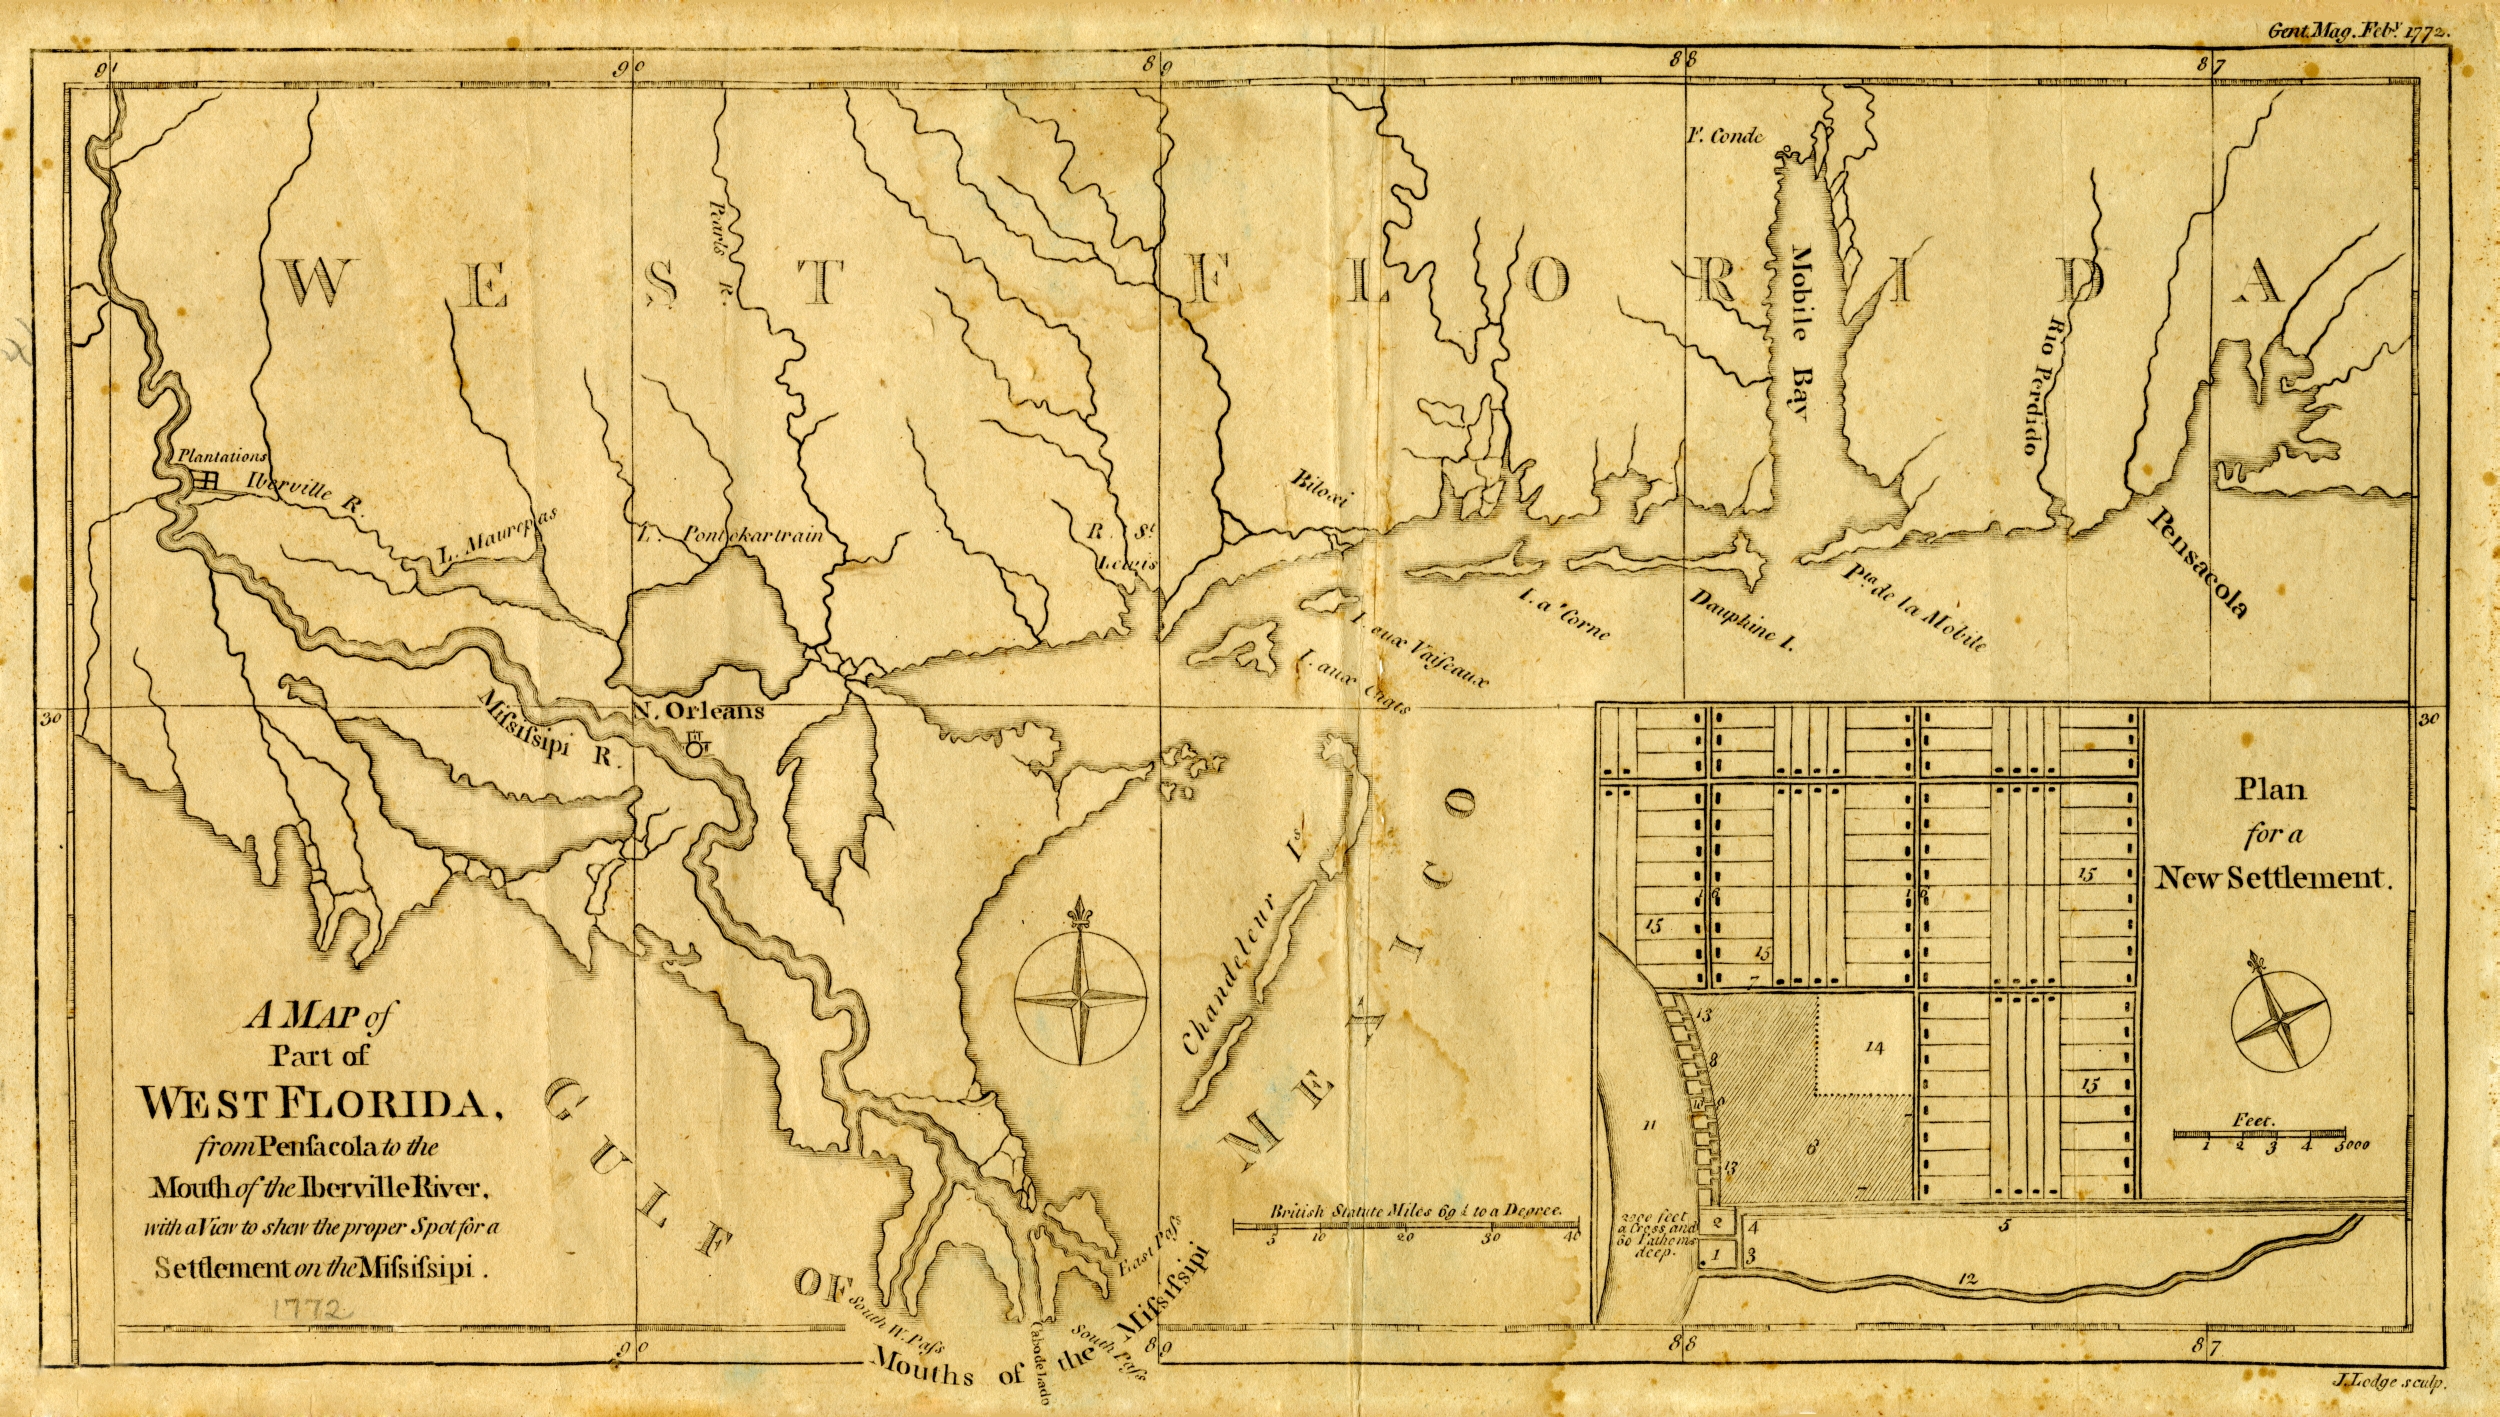 Map of West Florida, 1772